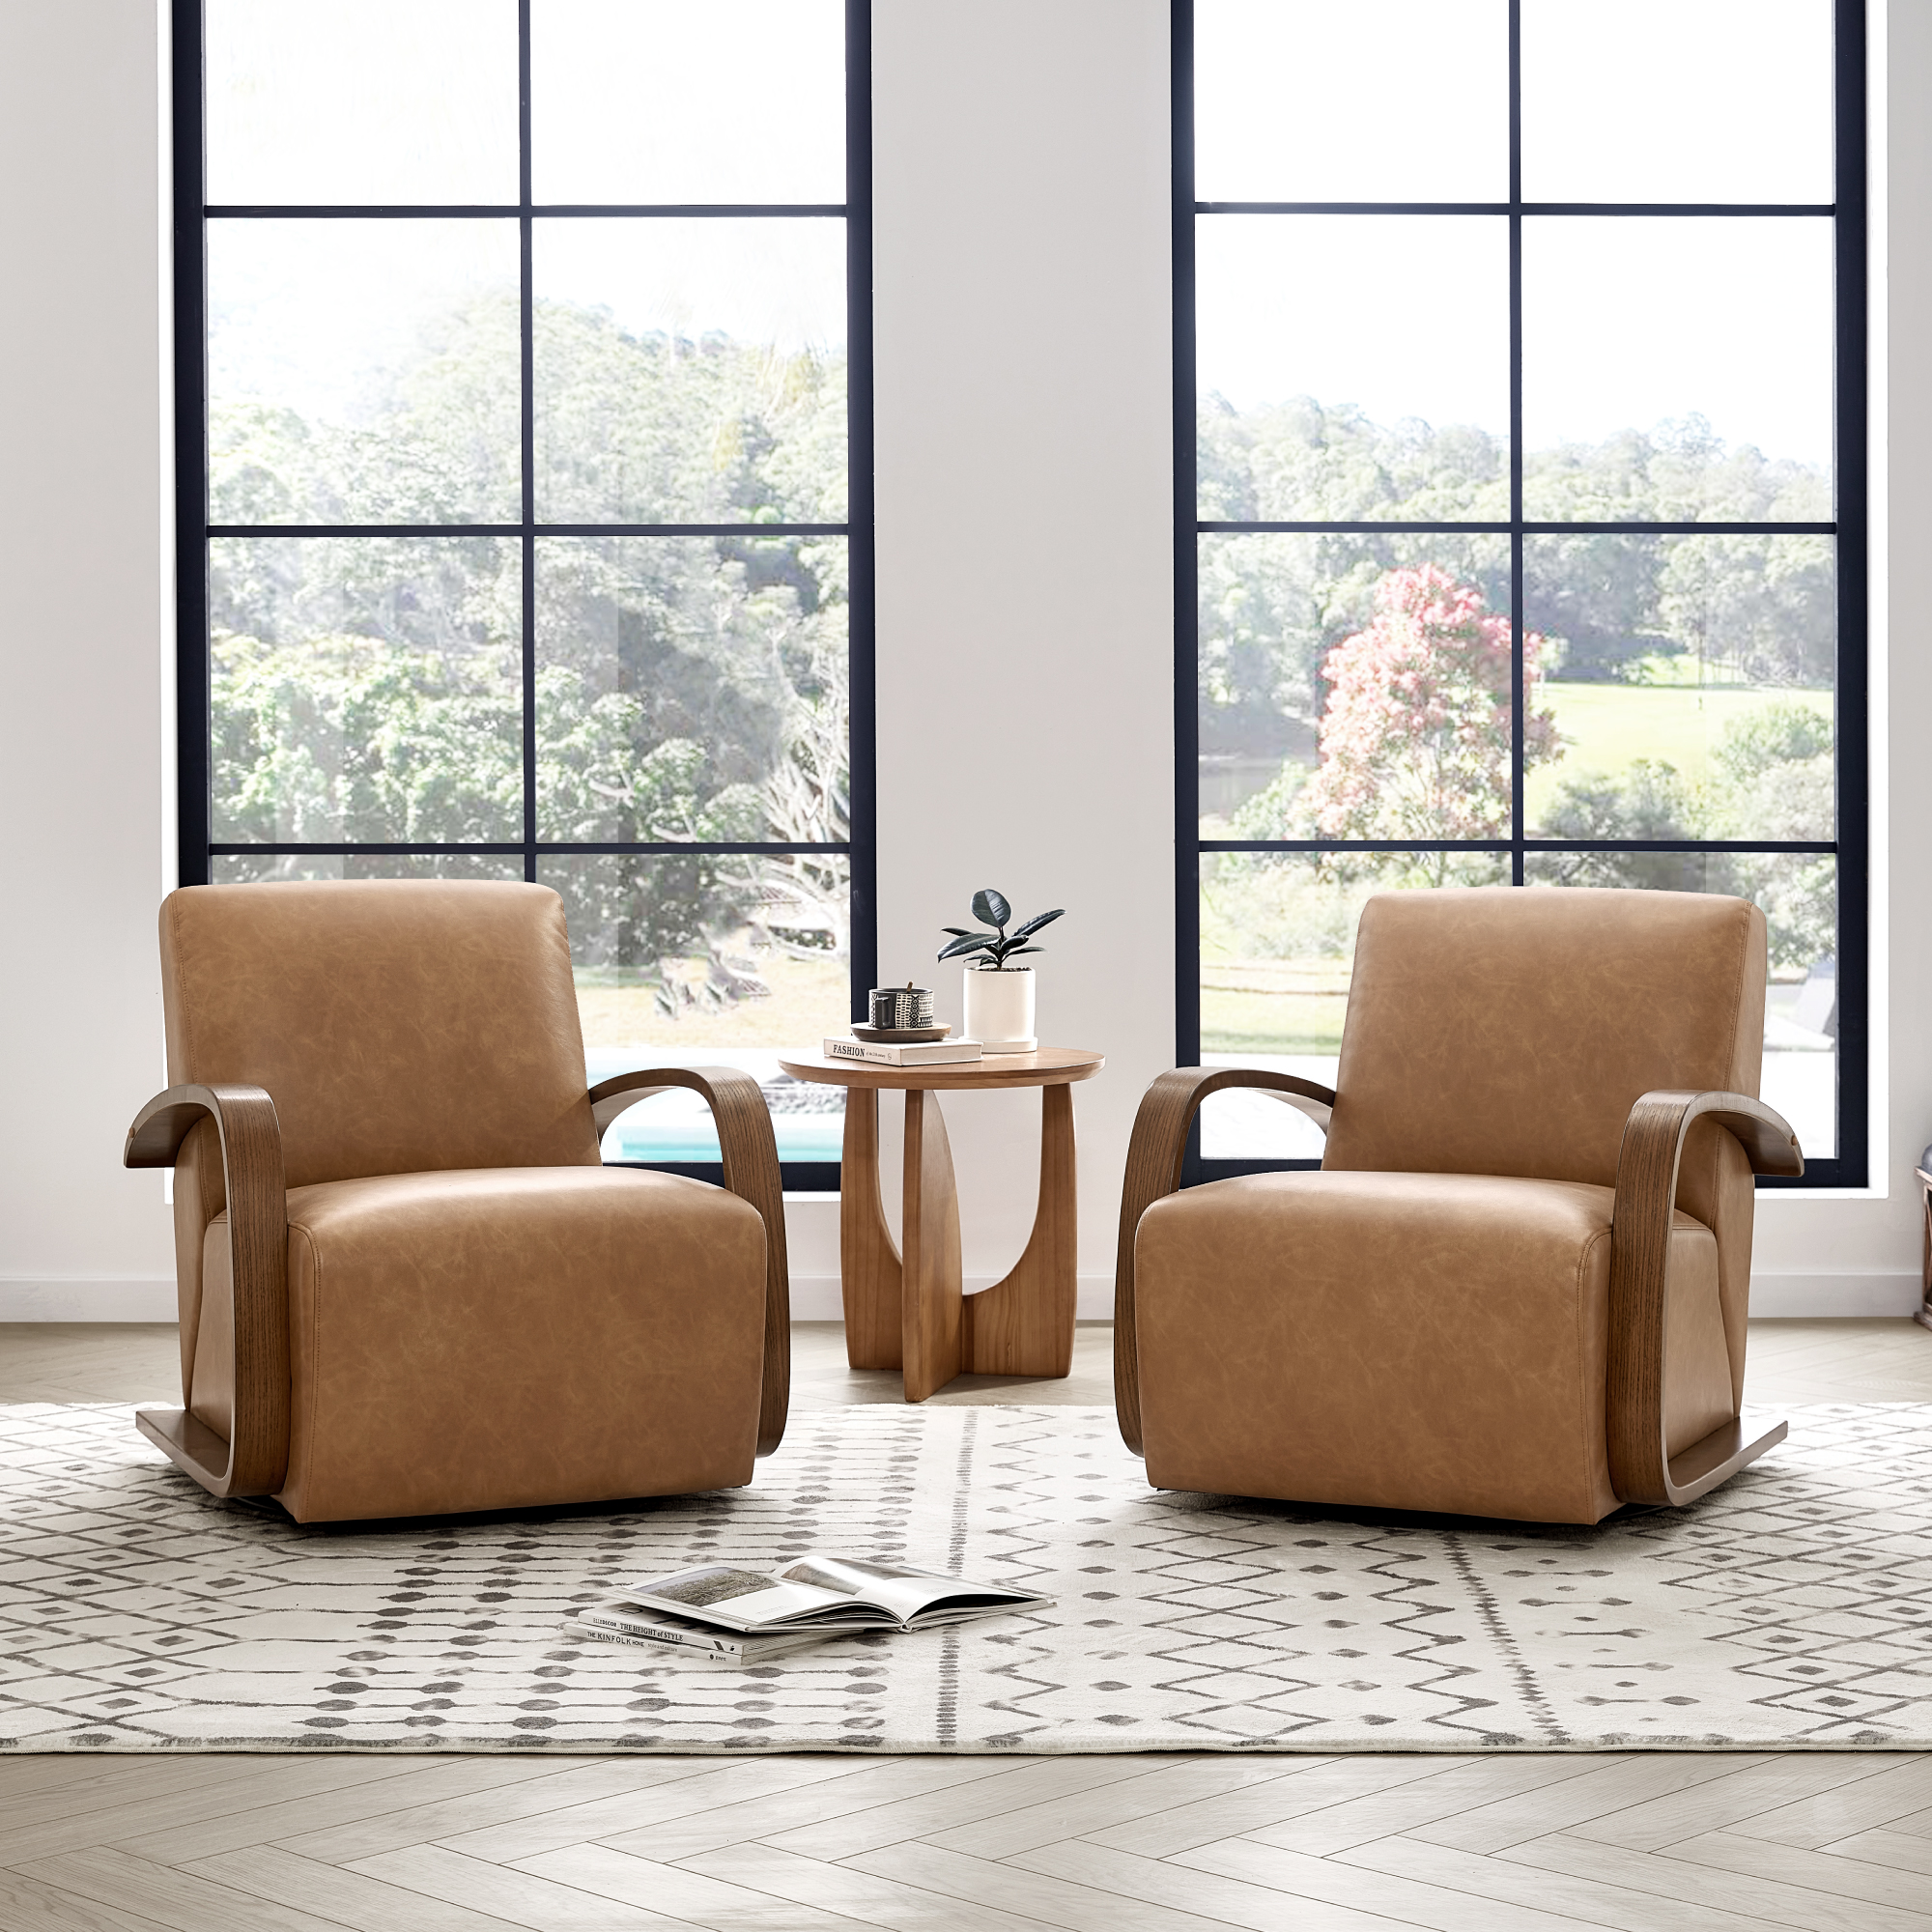 CHITA Swivel Accent Chair with U-shaped Wood Arm for Living Room Beedroom, Cognac Brown & Walnut - image 3 of 14